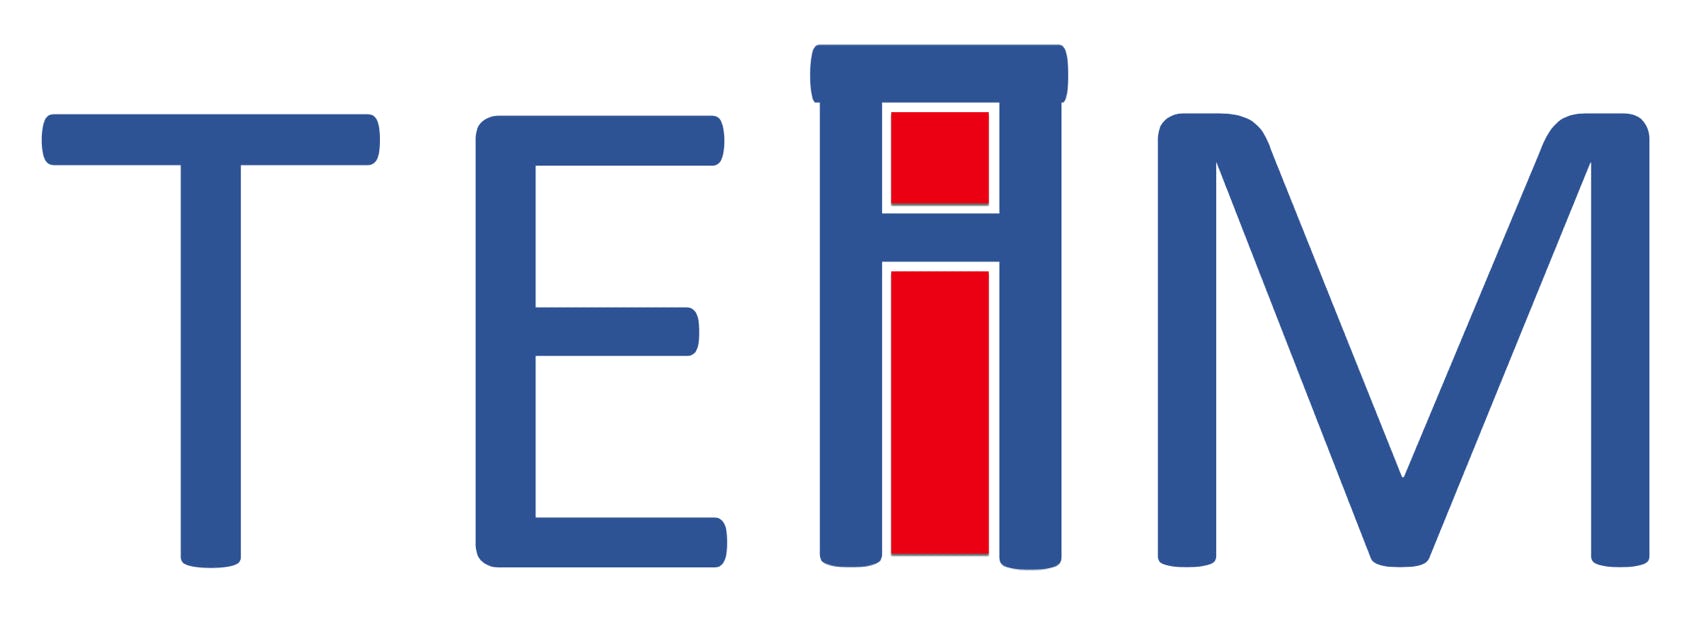 This image shows the word TEAM with the letter A made to also look like a letter i